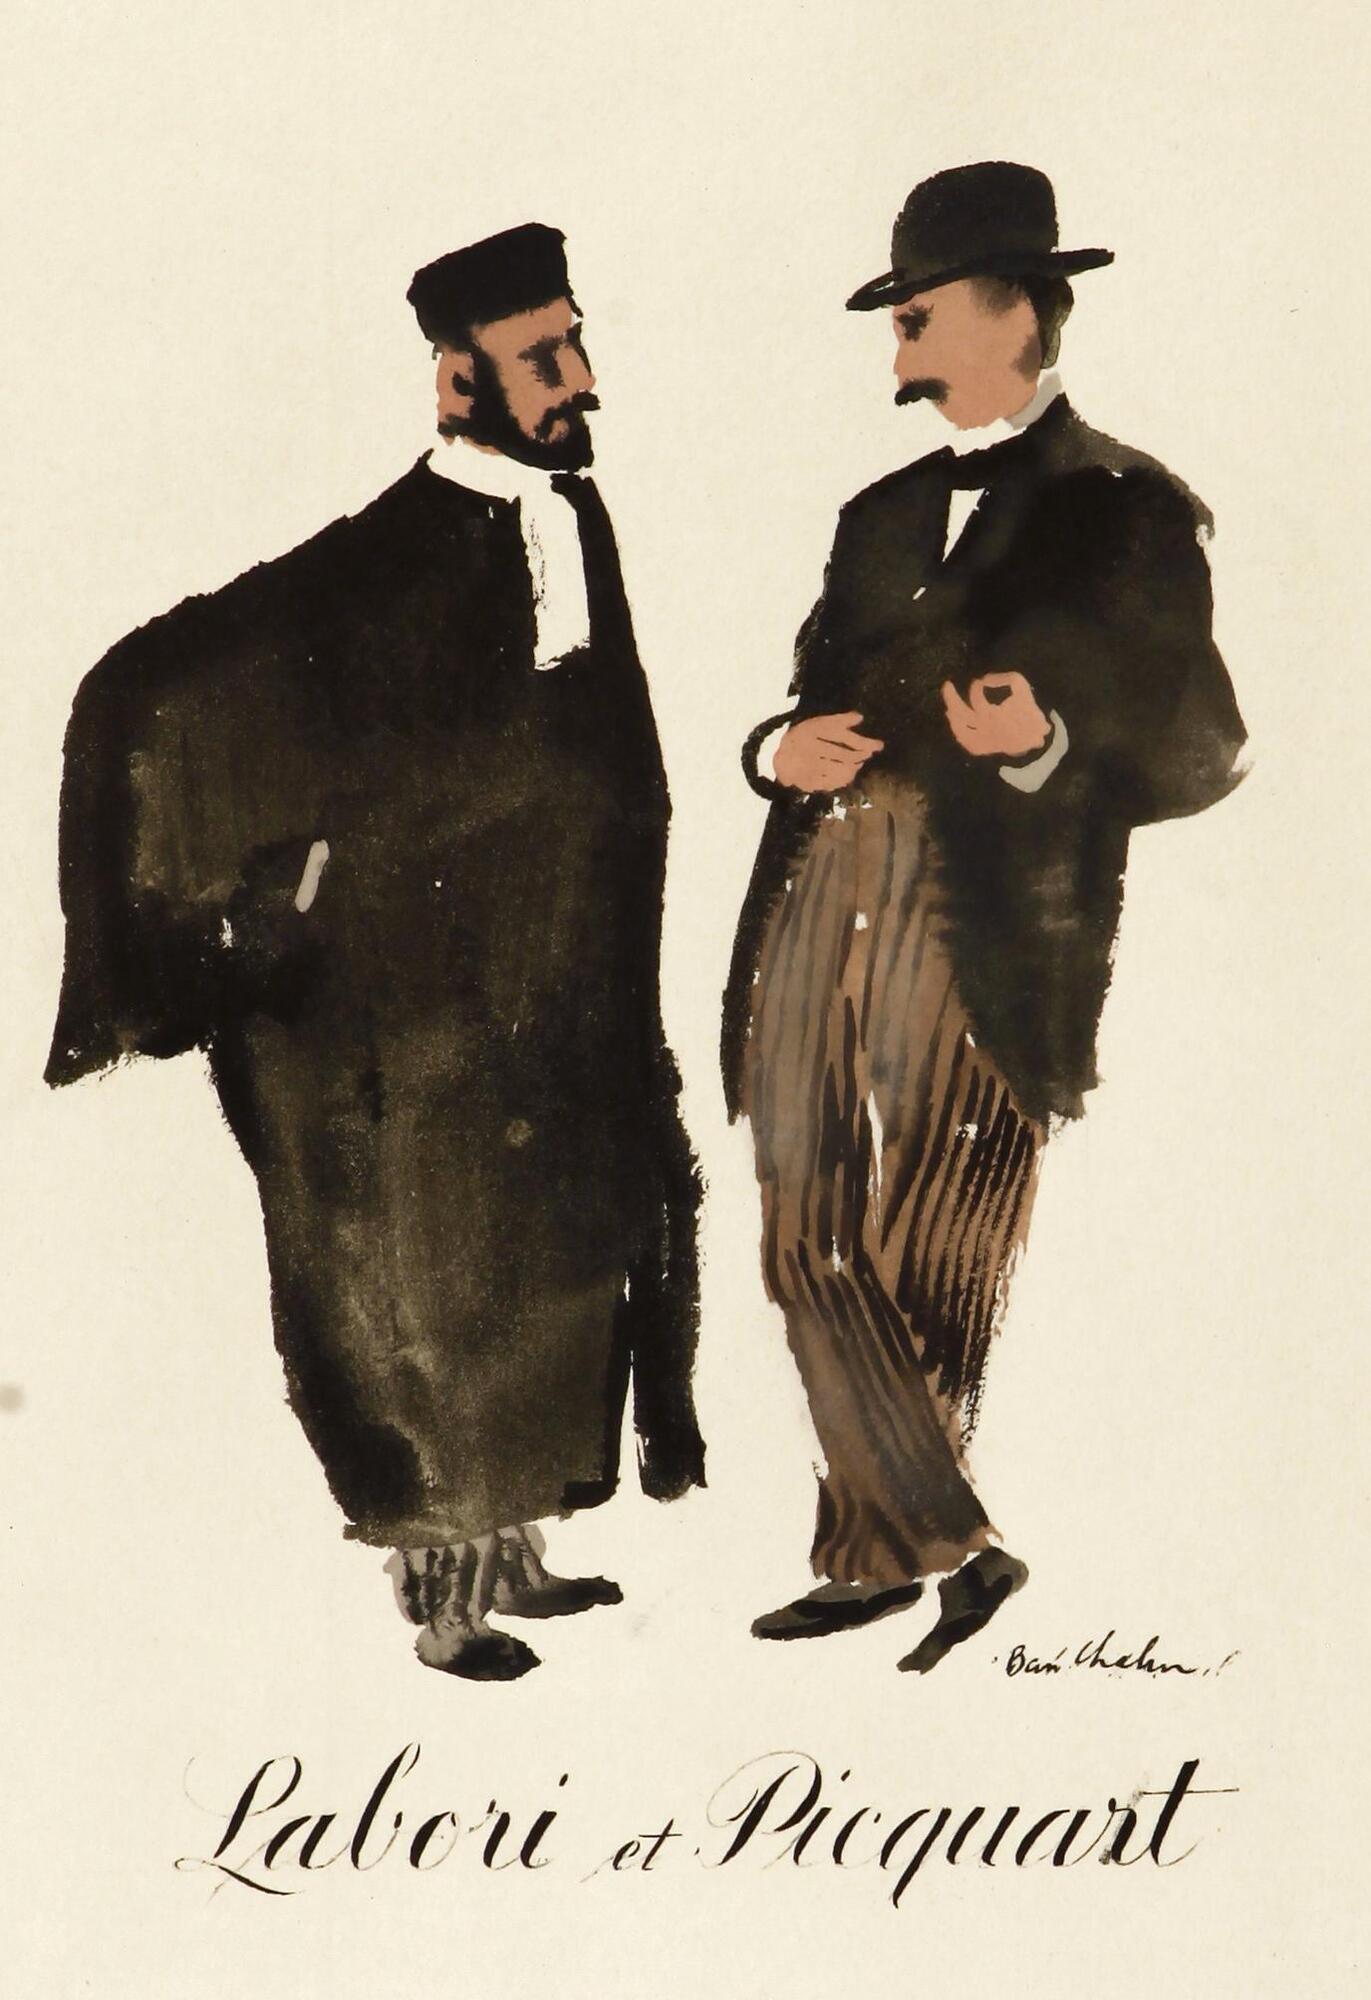 Two men stand in a conversational pose.  The man on the left is dressed in robes while the other is in regular street clothing.  Beneath the men reads "Labori et Picquart", or "Labori and Picquart".